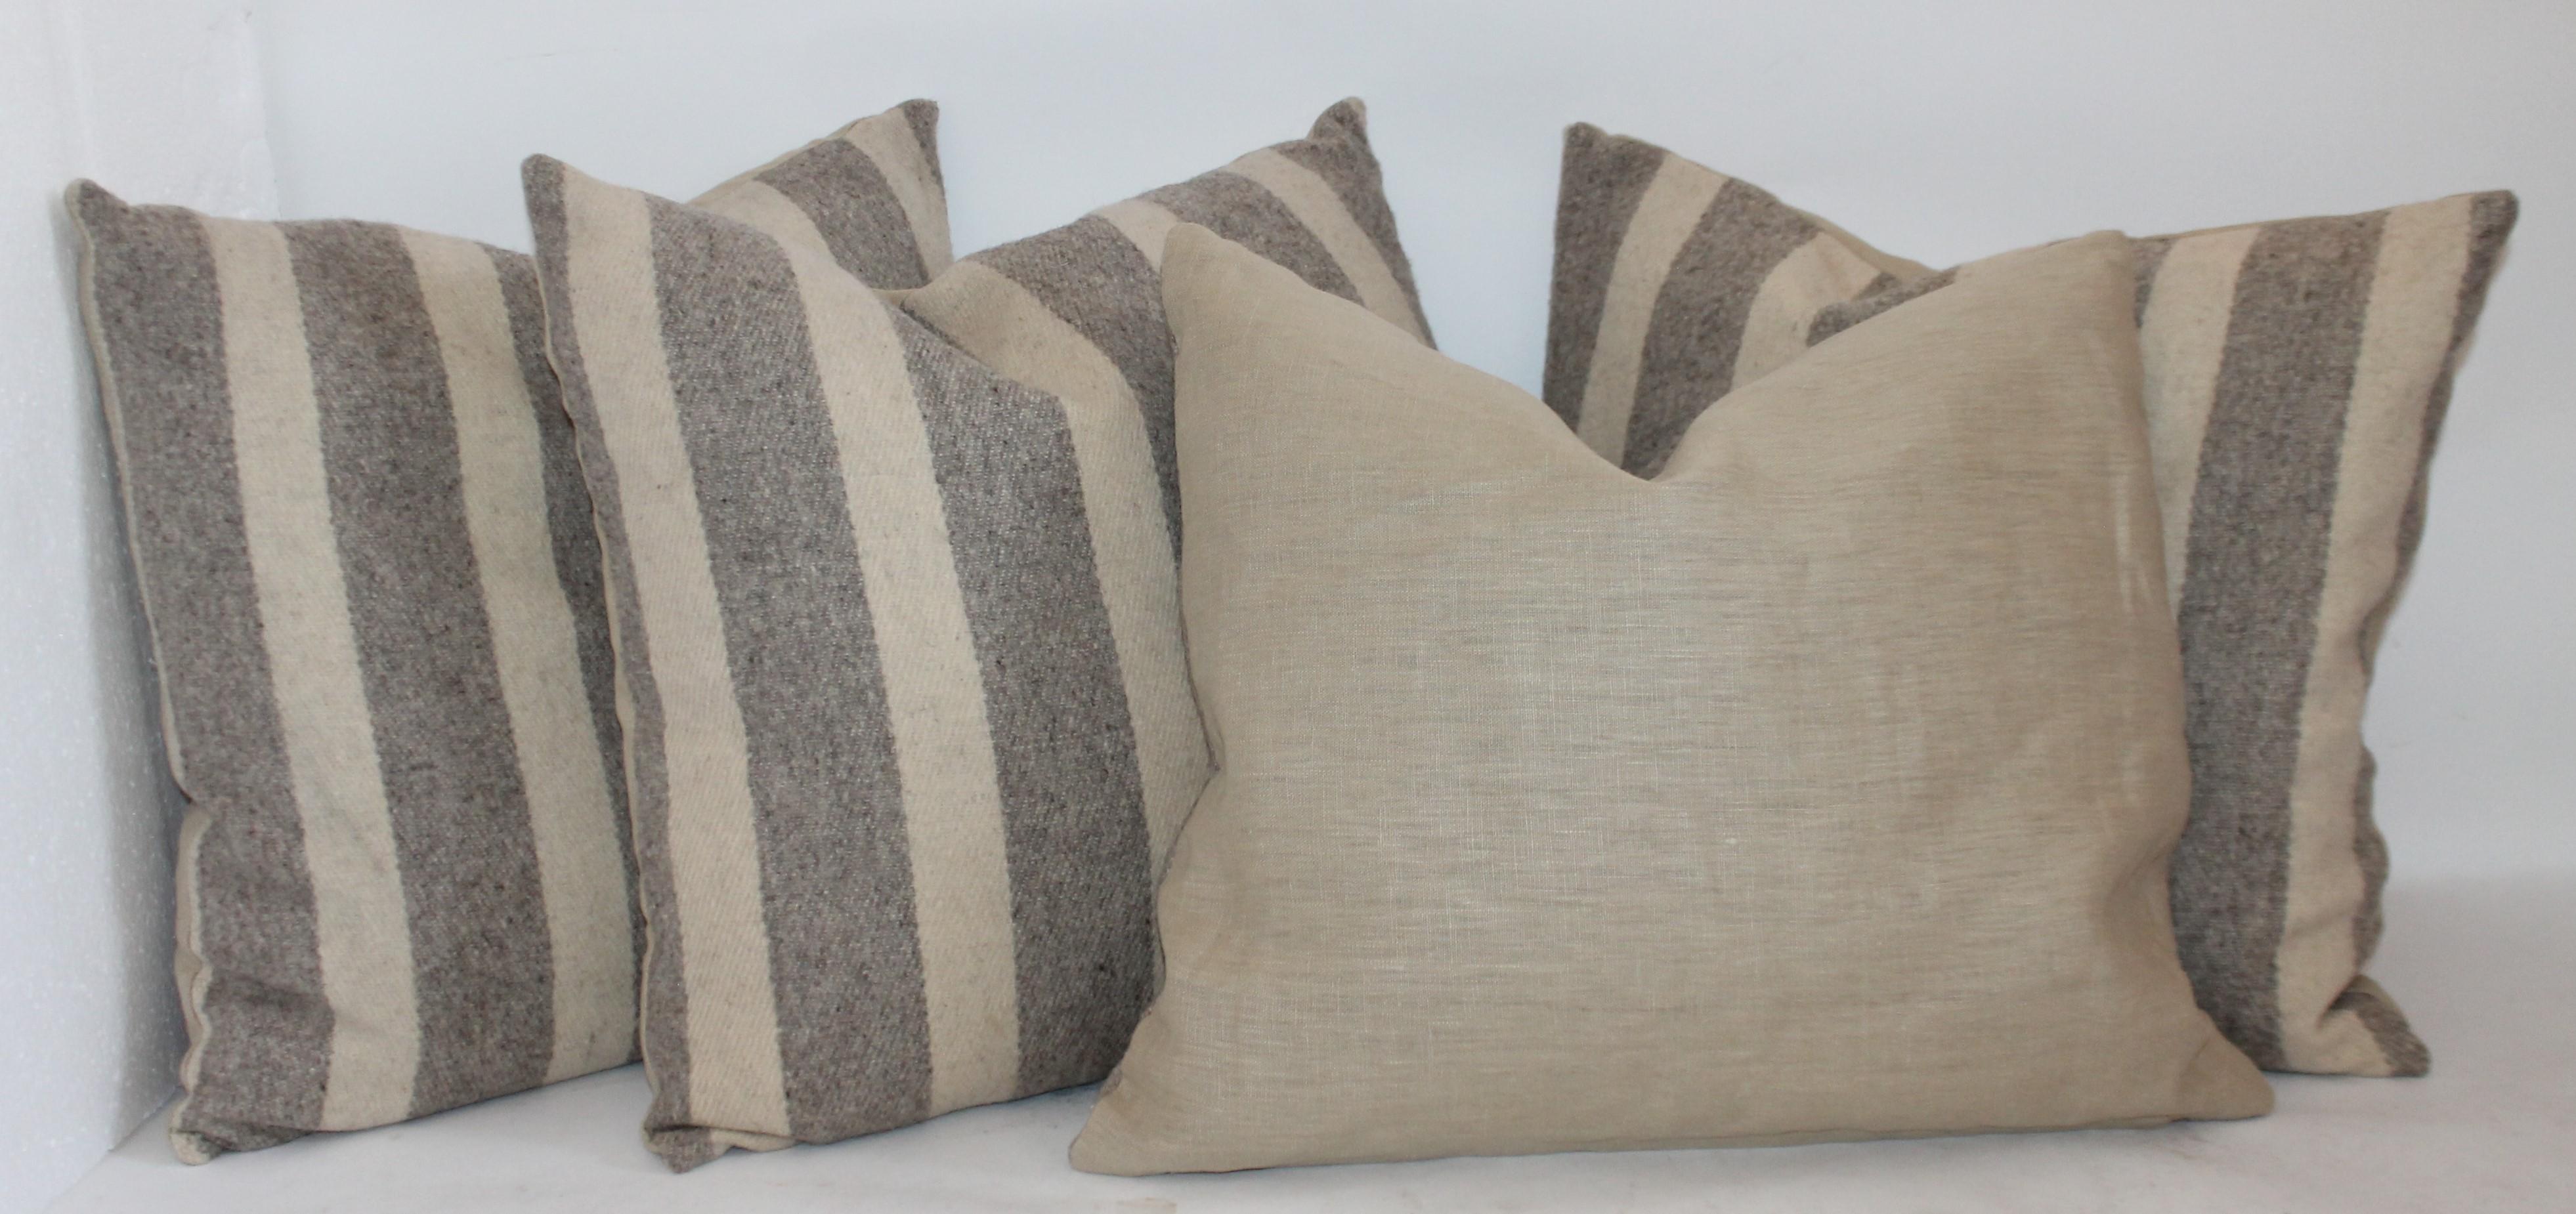 20th Century Collection of Wool Plaid Pillows, Six Pillows Total